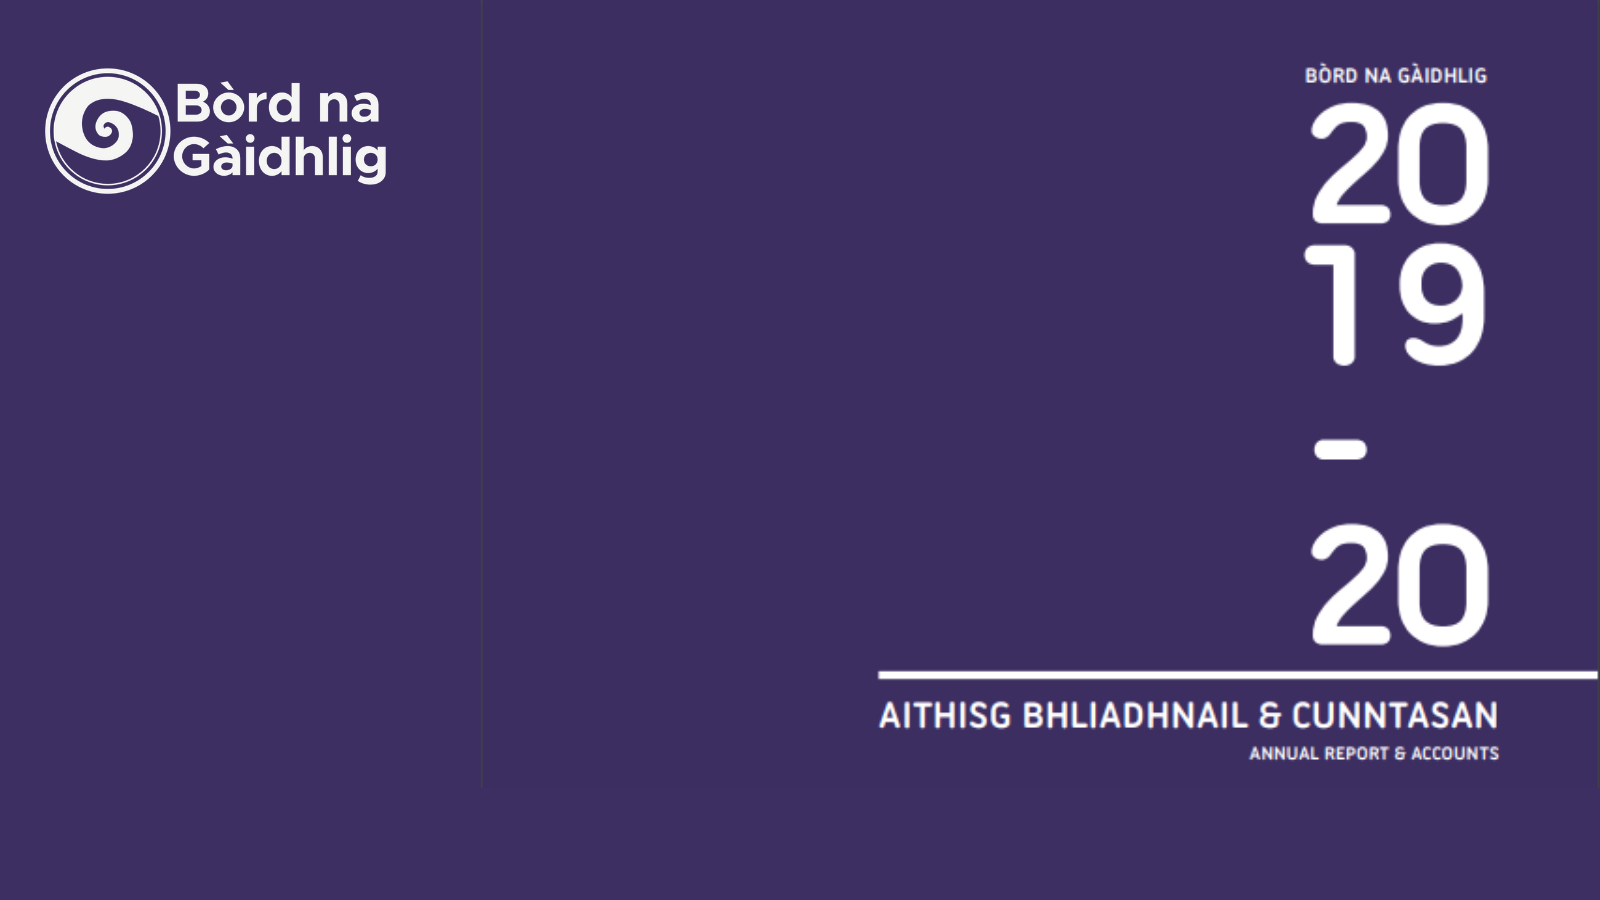 Picture: The cover of Bòrd na Gàidhlig's Annual Report and Accounts - a purple page with white text reading "Bòrd na Gàidhlig 2019-20 Aithisg Bhliadhnail is Cunntasan / Annual Report and Accounts" down the right hand side, and has the Bòrd na Gàidhlig logo on the left.